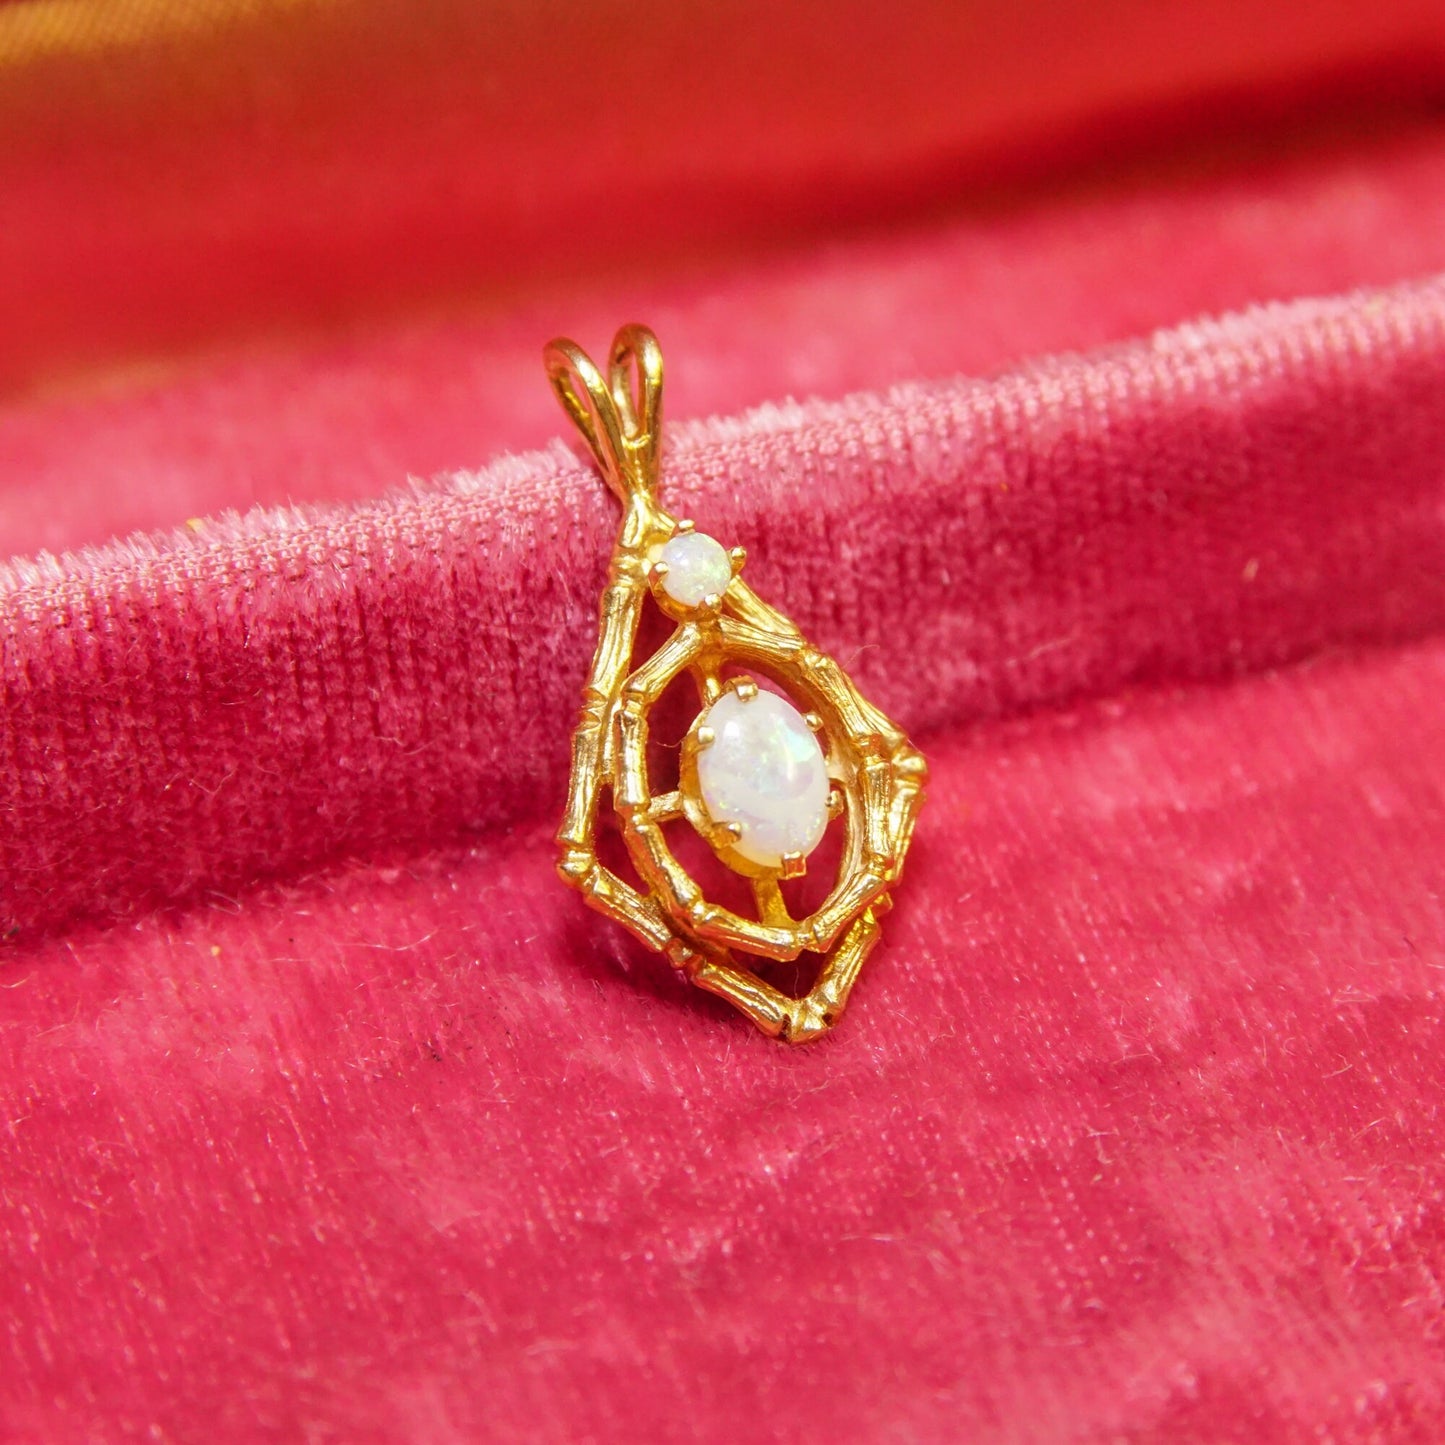 10K yellow gold bamboo motif opal pendant with two white opal cabochon stones on red velvet fabric